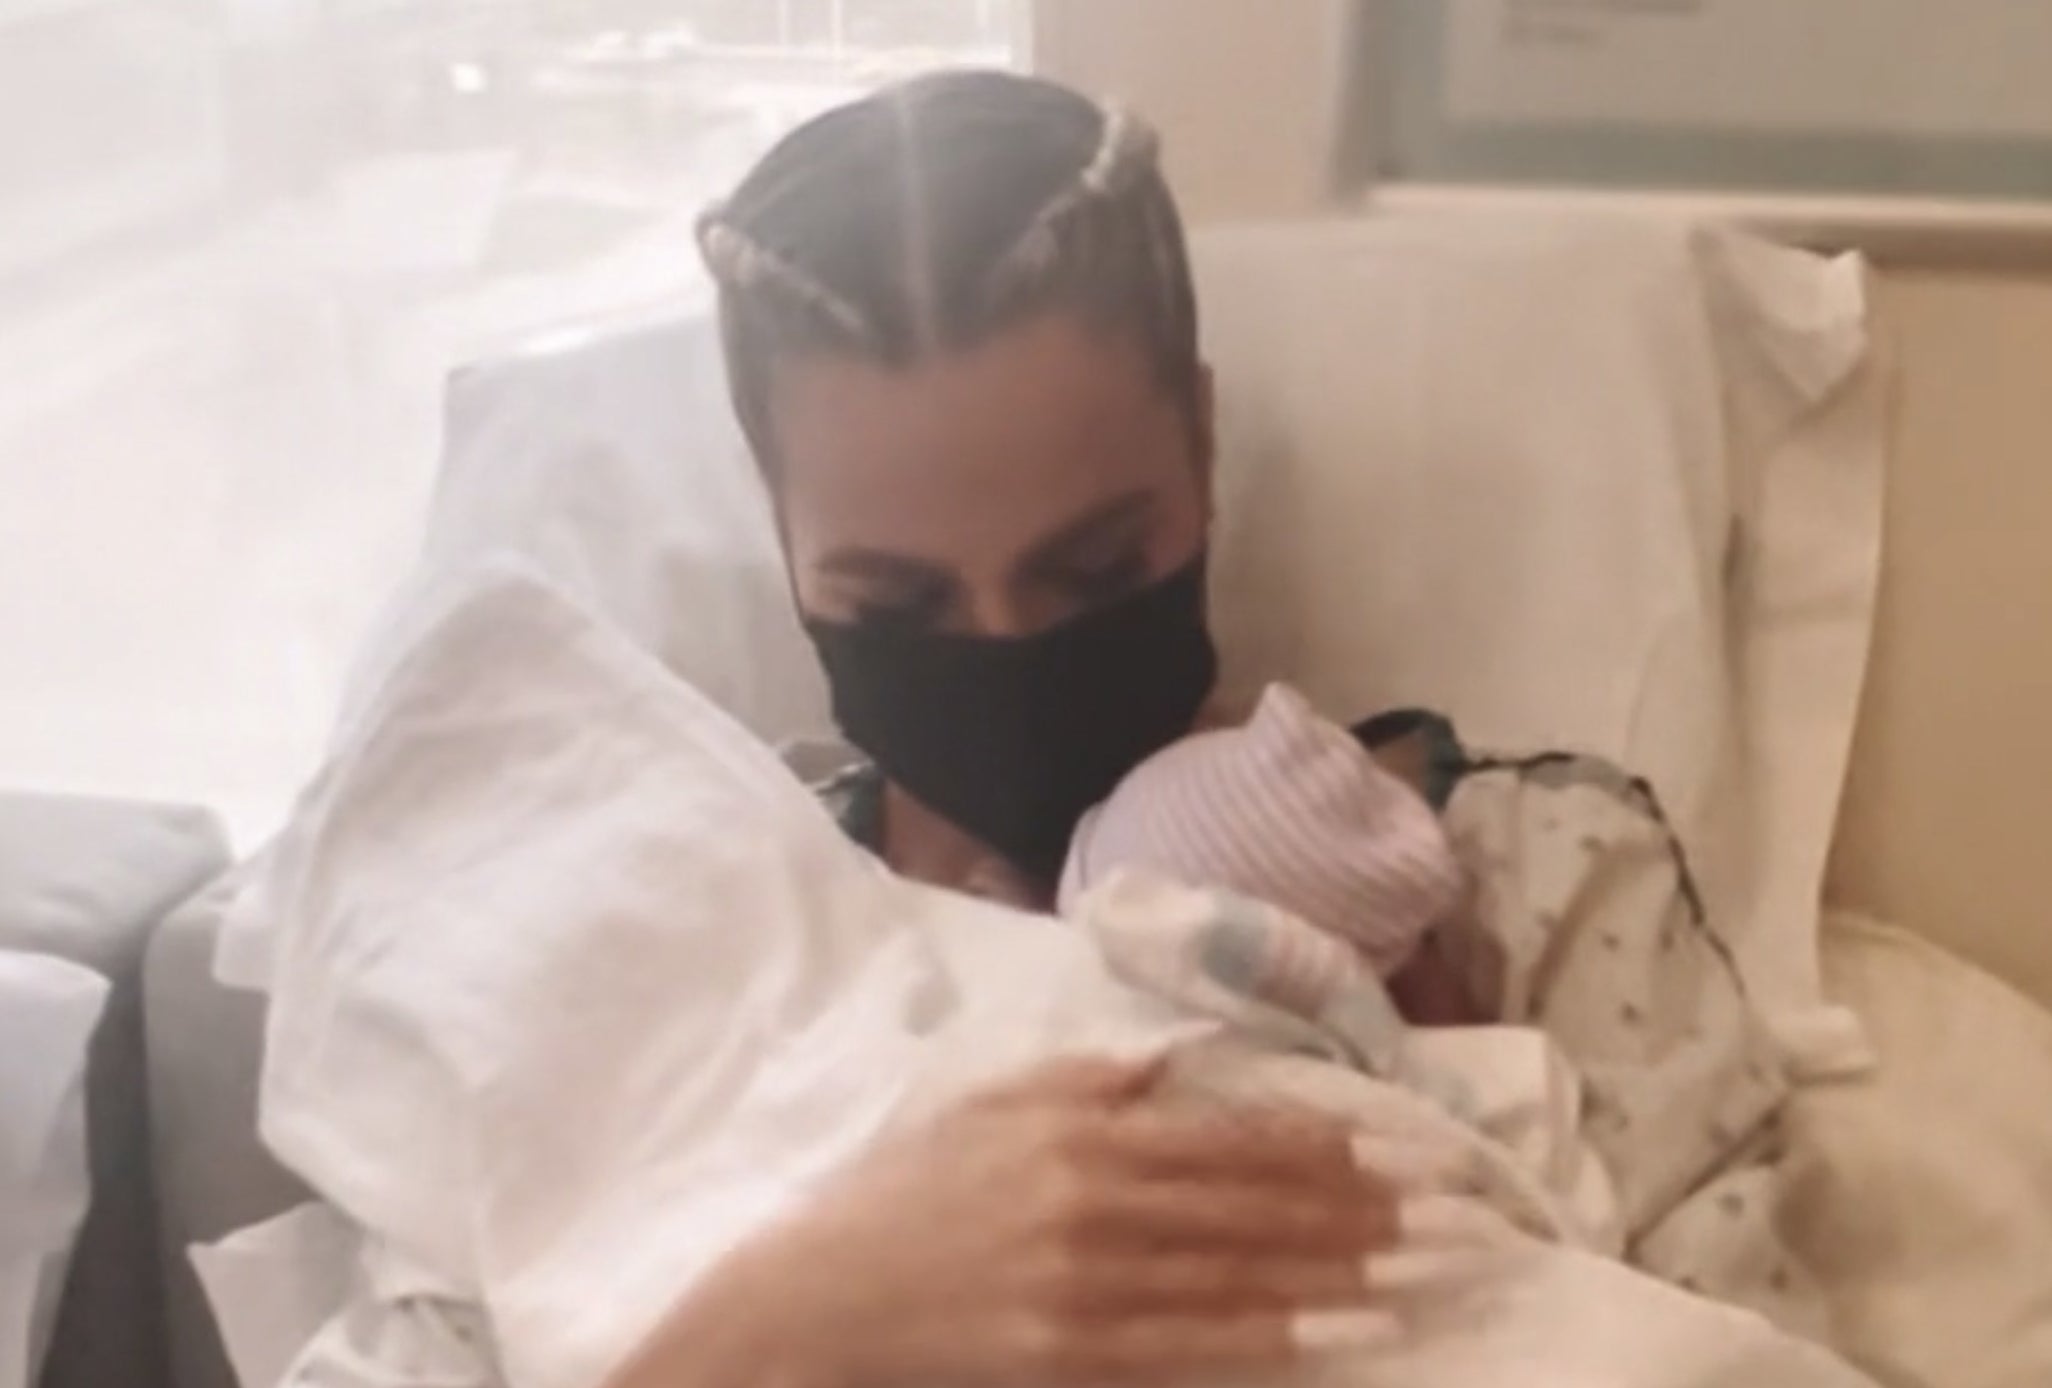 Khloe sits with a baby on her chest covered in blankets